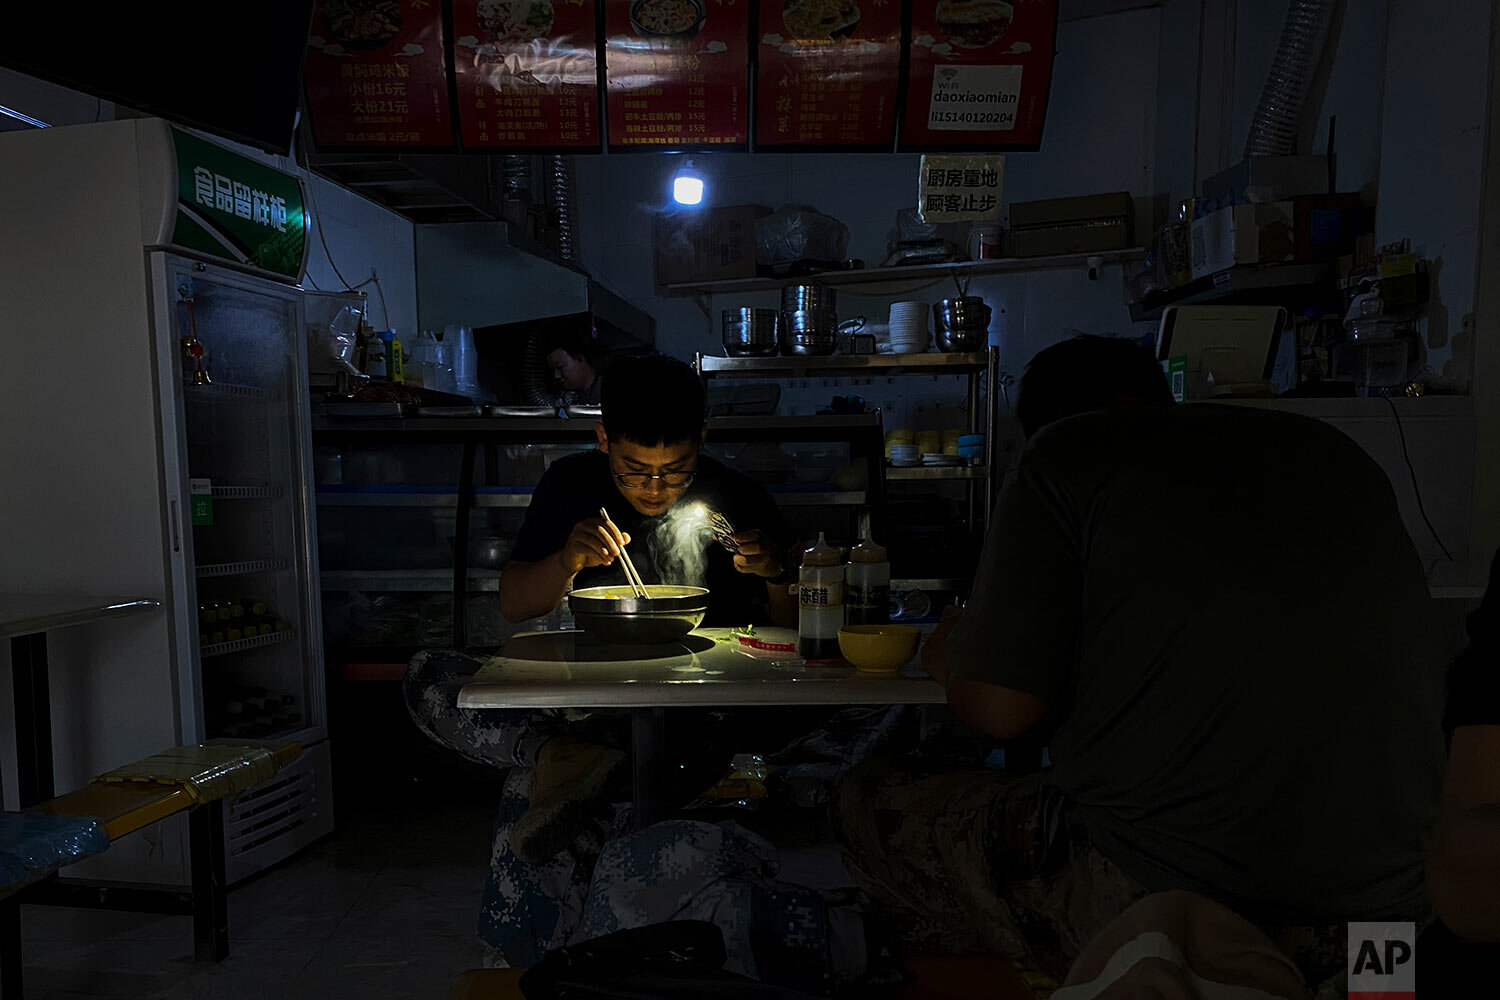  A man uses his smartphone flashlight to light up his bowl of noodles as he eats his breakfast at a restaurant during a blackout in Shenyang in northeastern China's Liaoning Province, Wednesday, Sept. 29, 2021. (AP Photo/Olivia Zhang) 